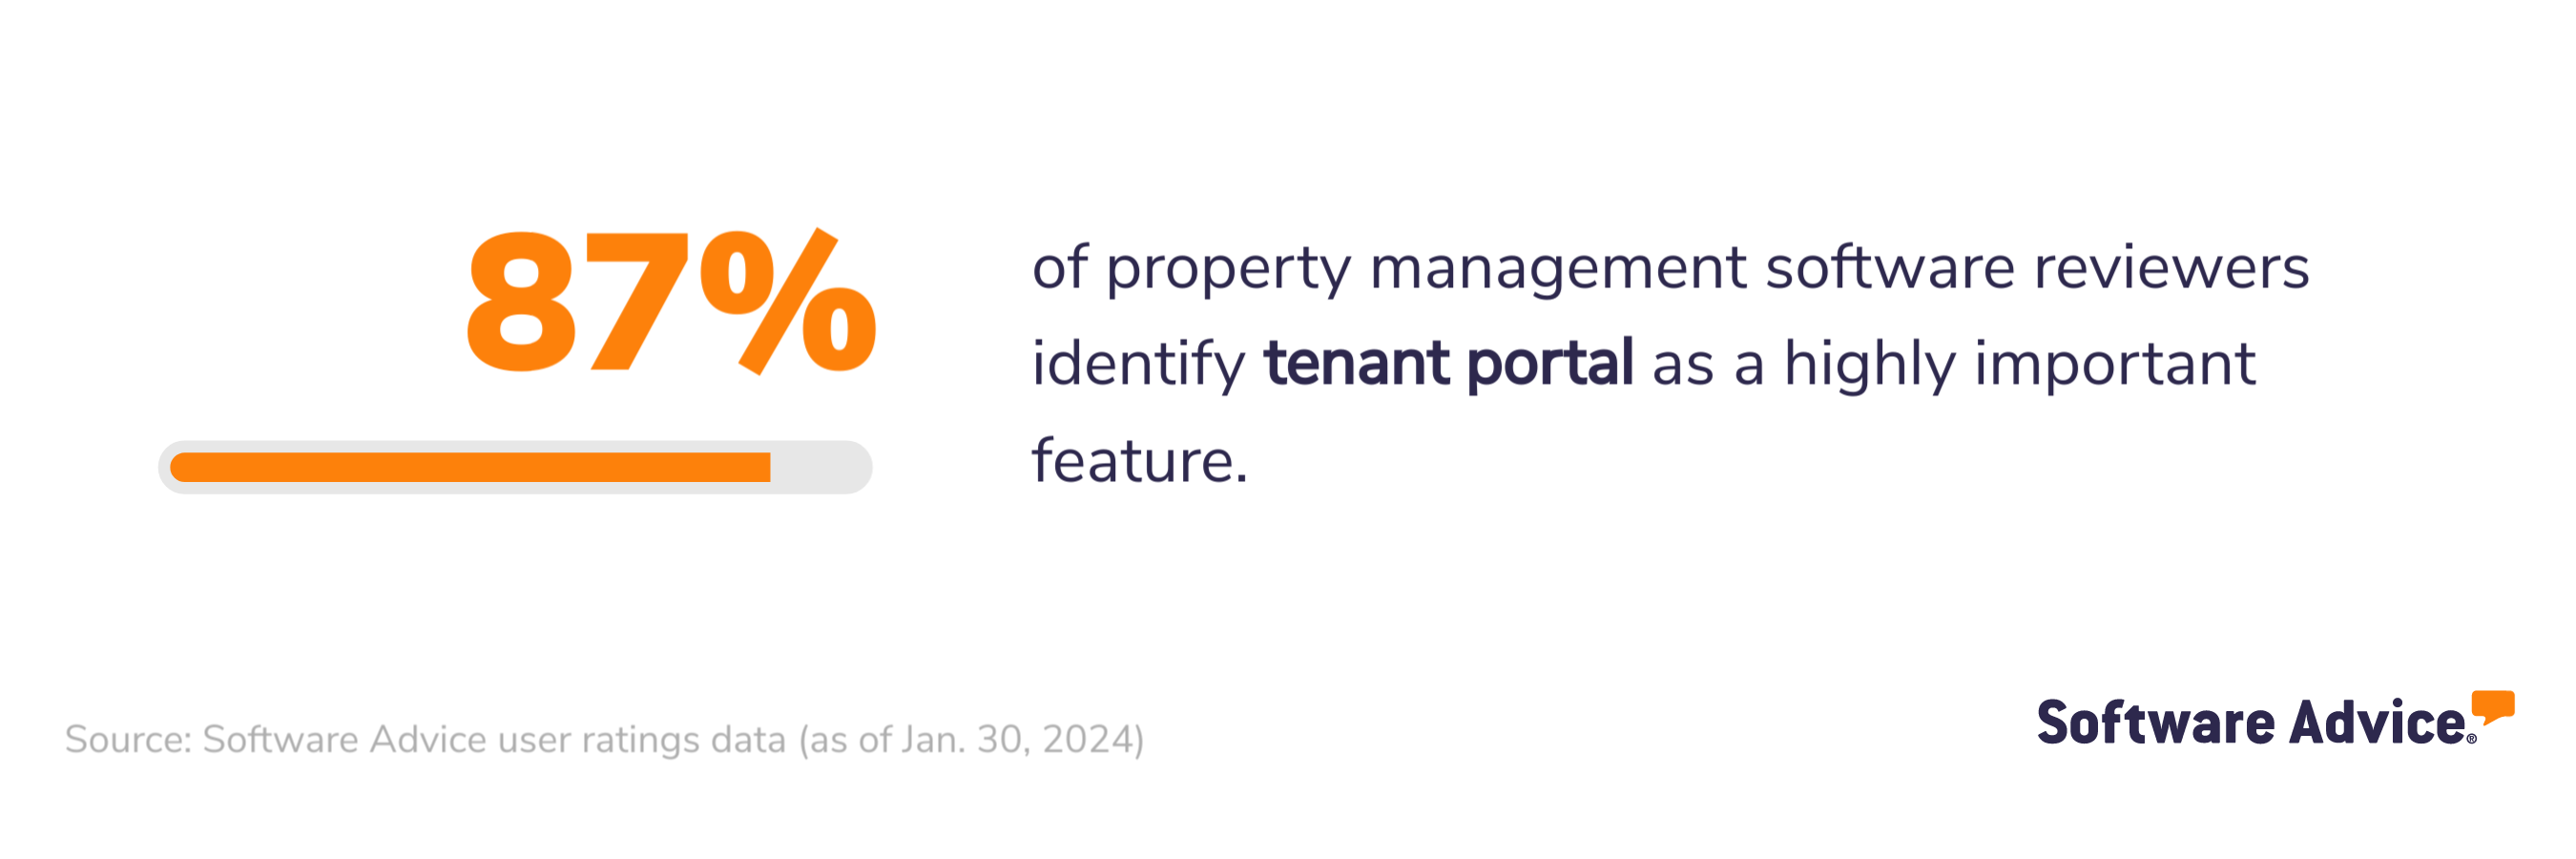 87% of property management software reviewers identify tenant portal as a highly important feature.